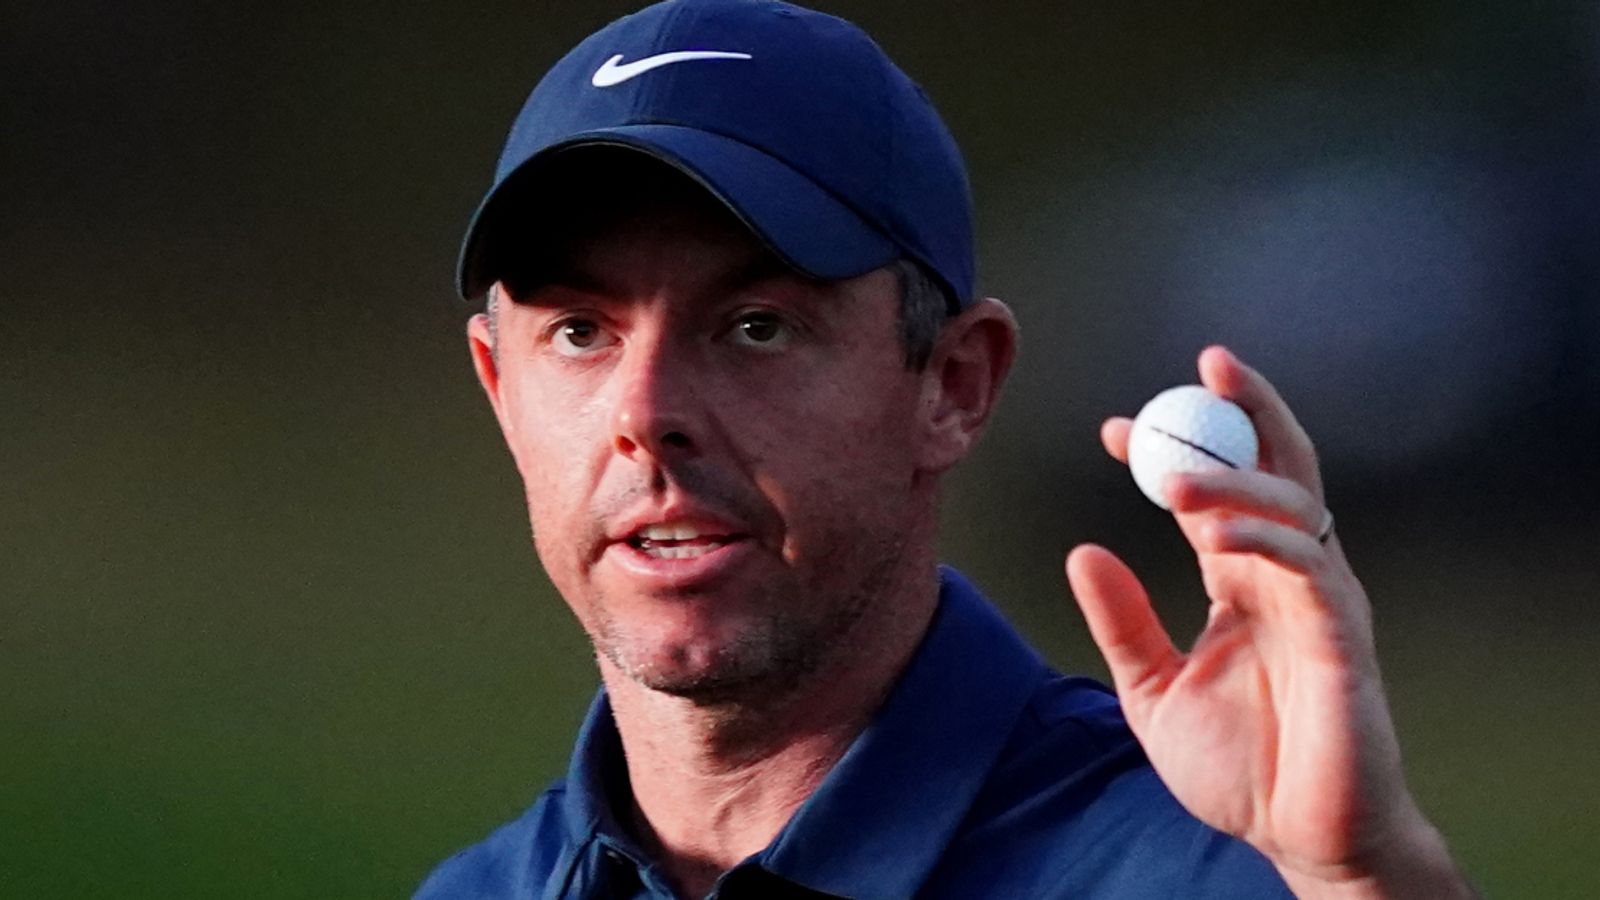 BMW PGA Championship Rory McIlroy birdies final hole to avoid cut as Ludvig Åberg shares lead at Wentworth Golf News Sky Sports